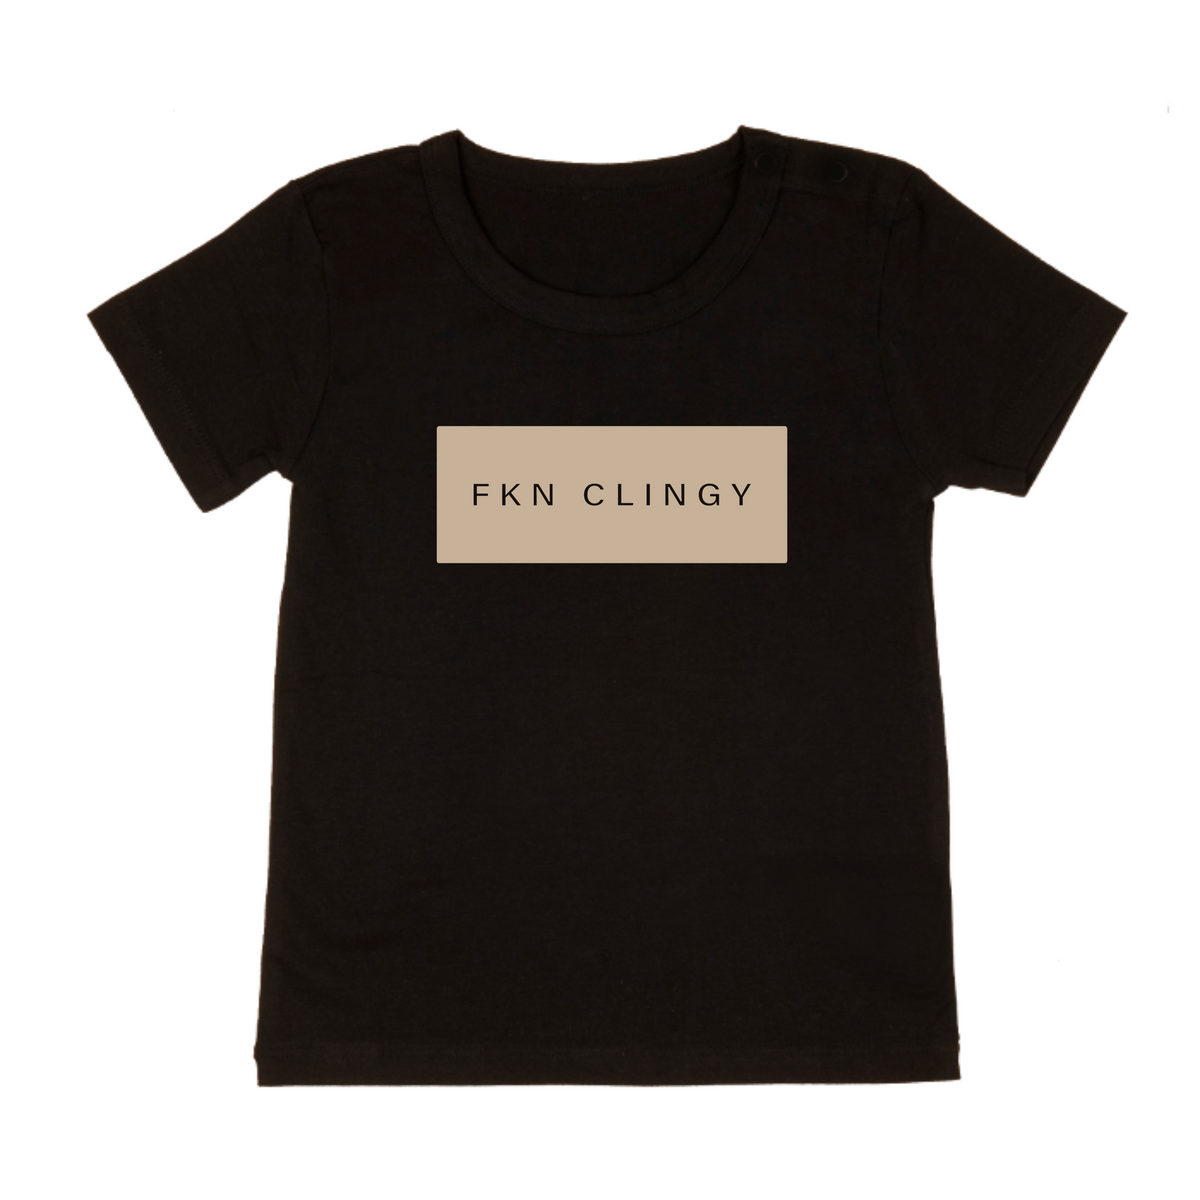 MLW By Design - FKN CLINGY™ Tee | Sand Print | Black or White